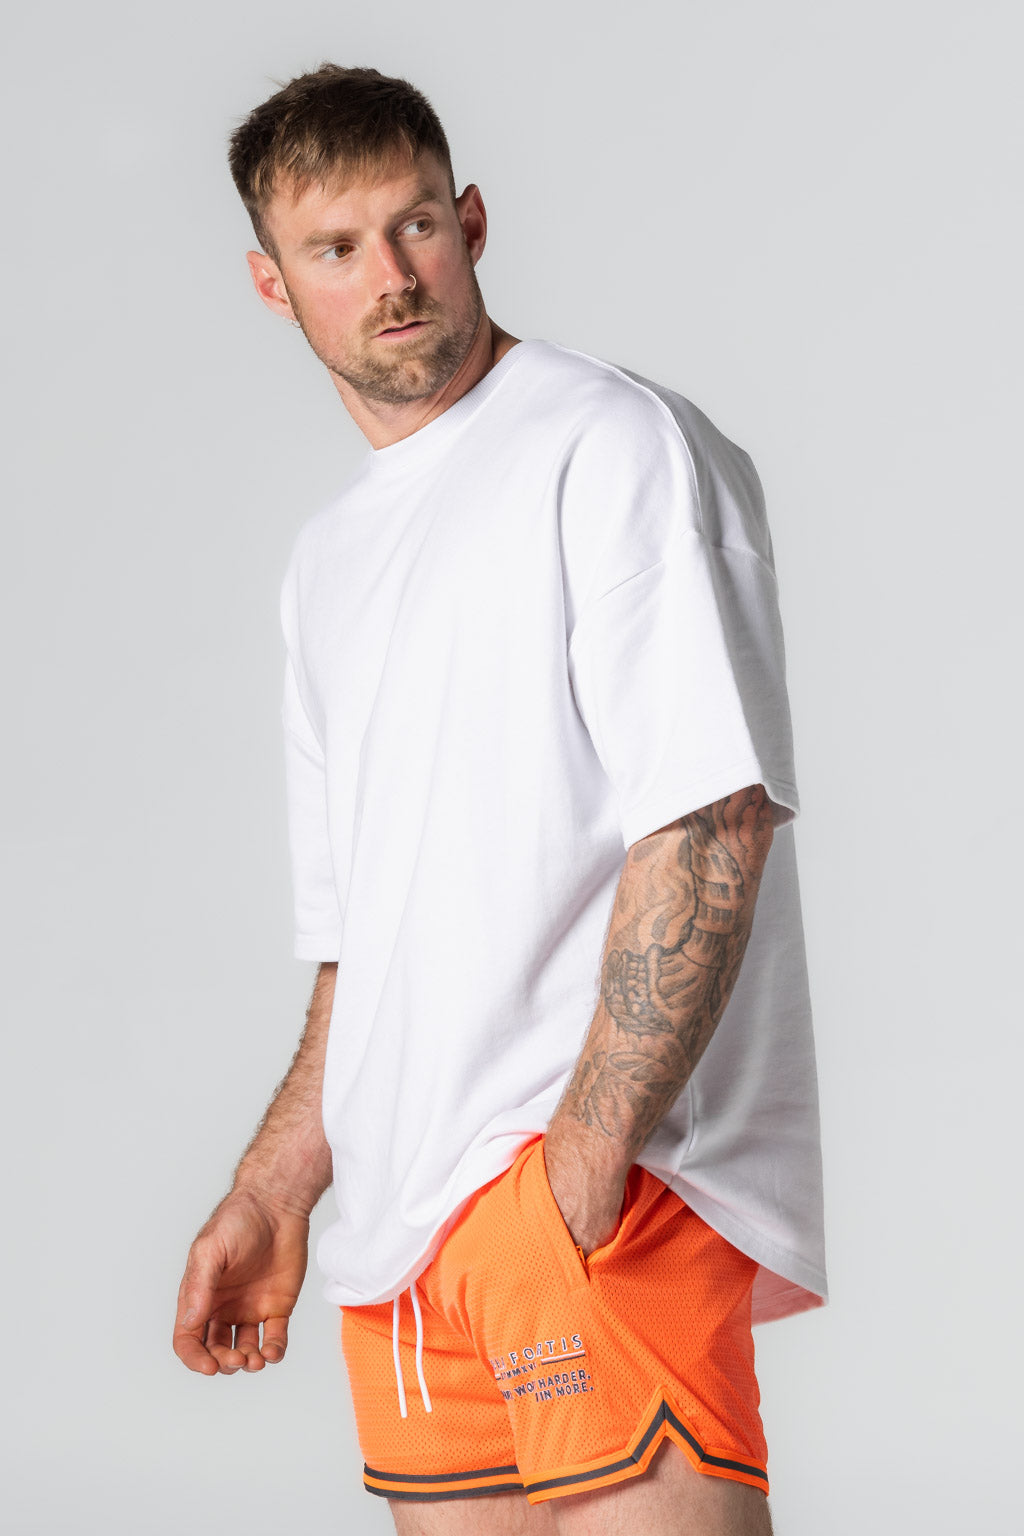 Unbounded Basketball Shorts Amaranth Pink by Alpha Fortis Streetwear